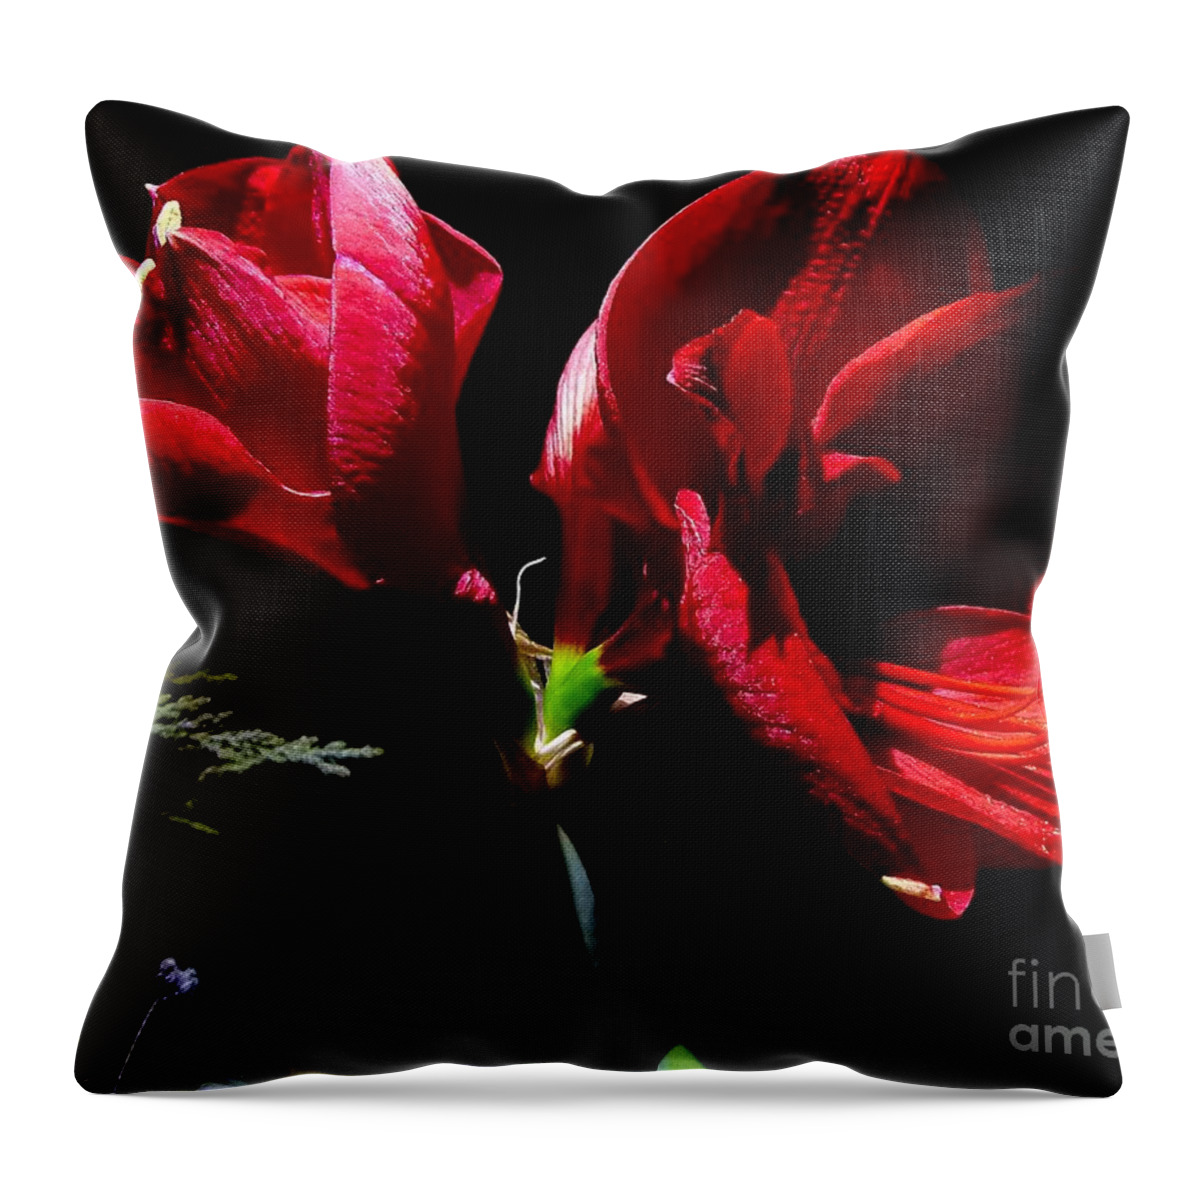 Floral Throw Pillow featuring the photograph Amaryllis Duet by Julia Hassett